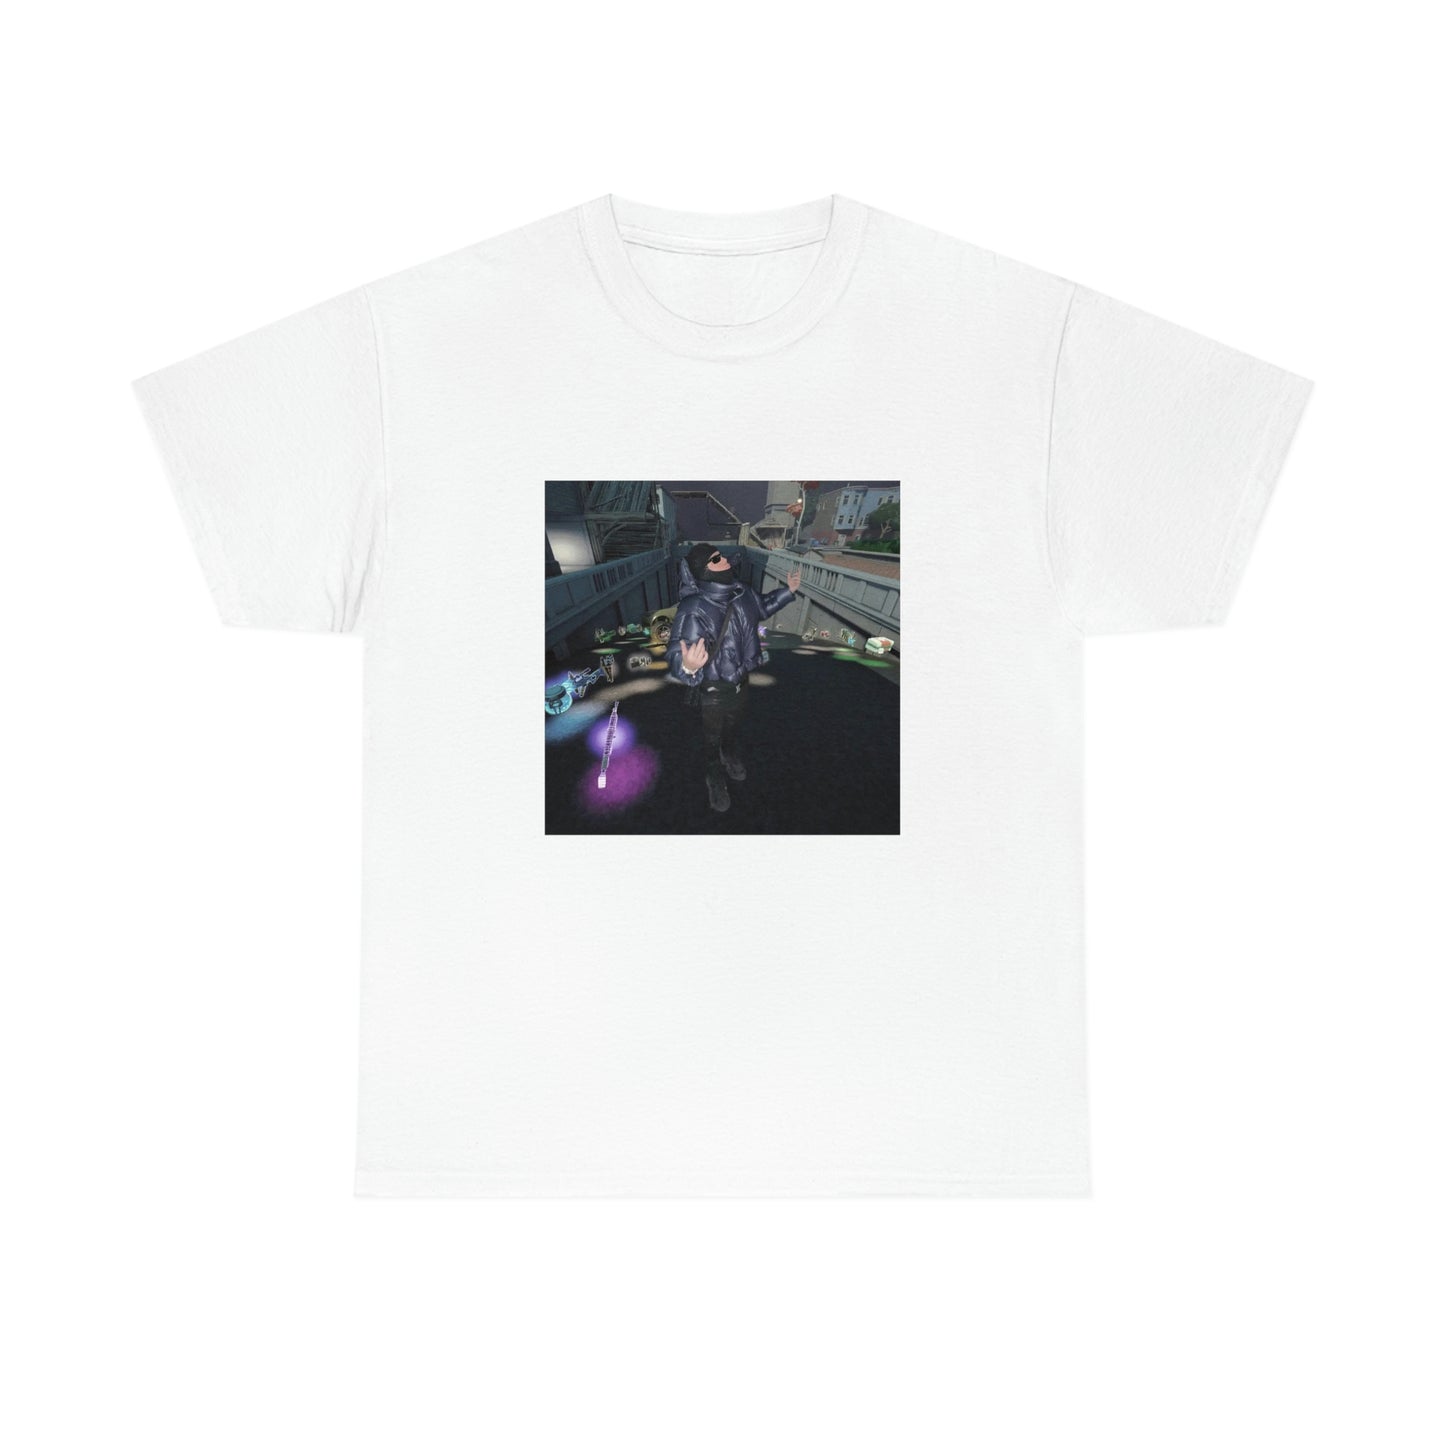 YEAT TILTED TOWERS TEE